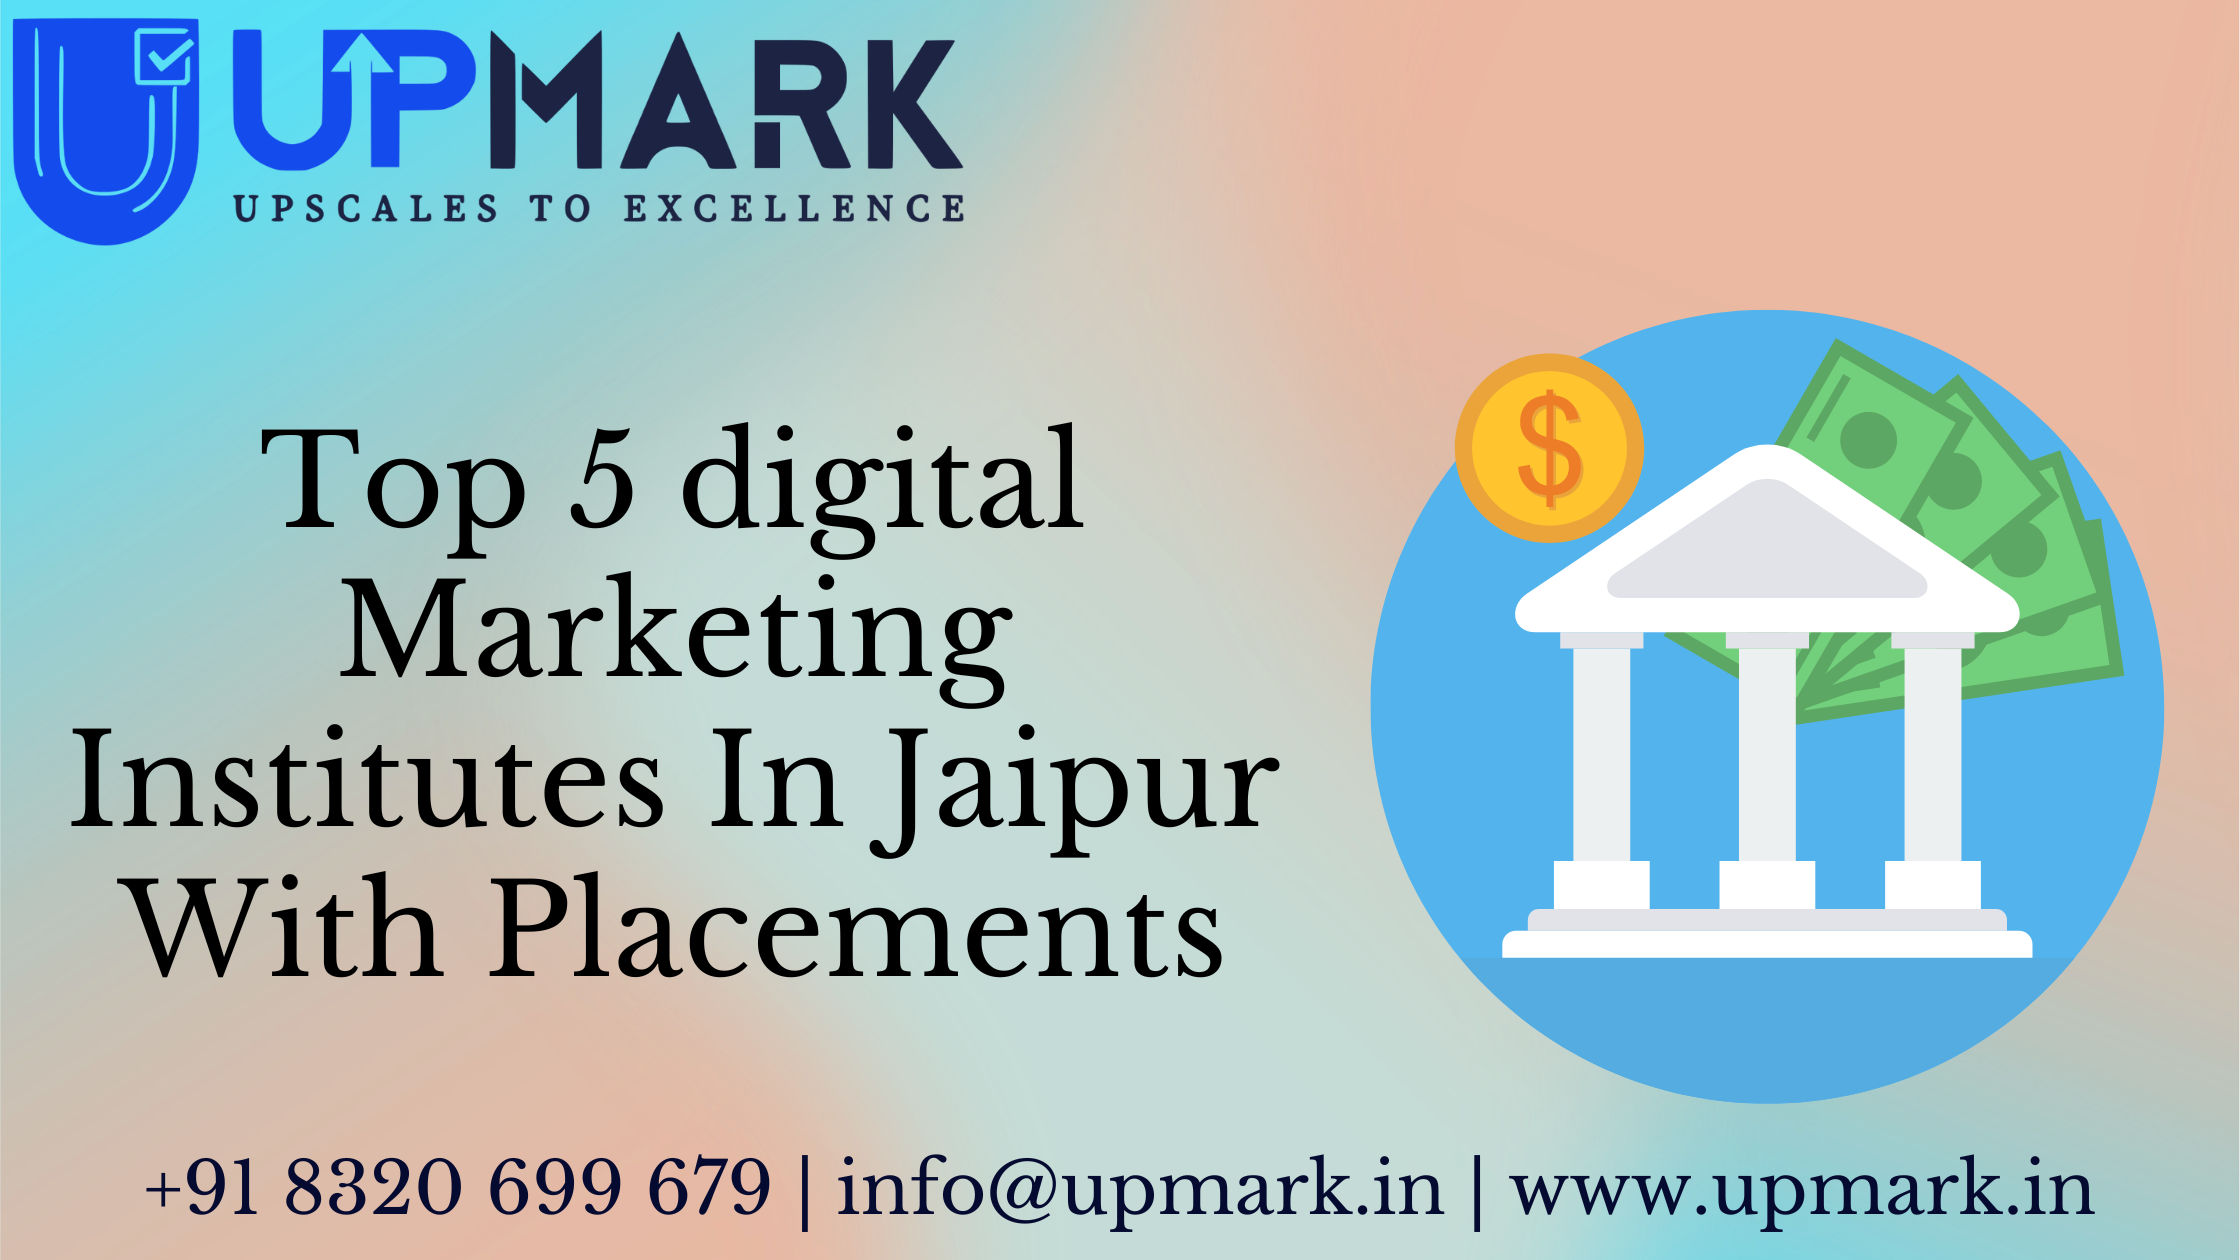 Top 5 digital Marketing Institutes In Jaipur With Placements